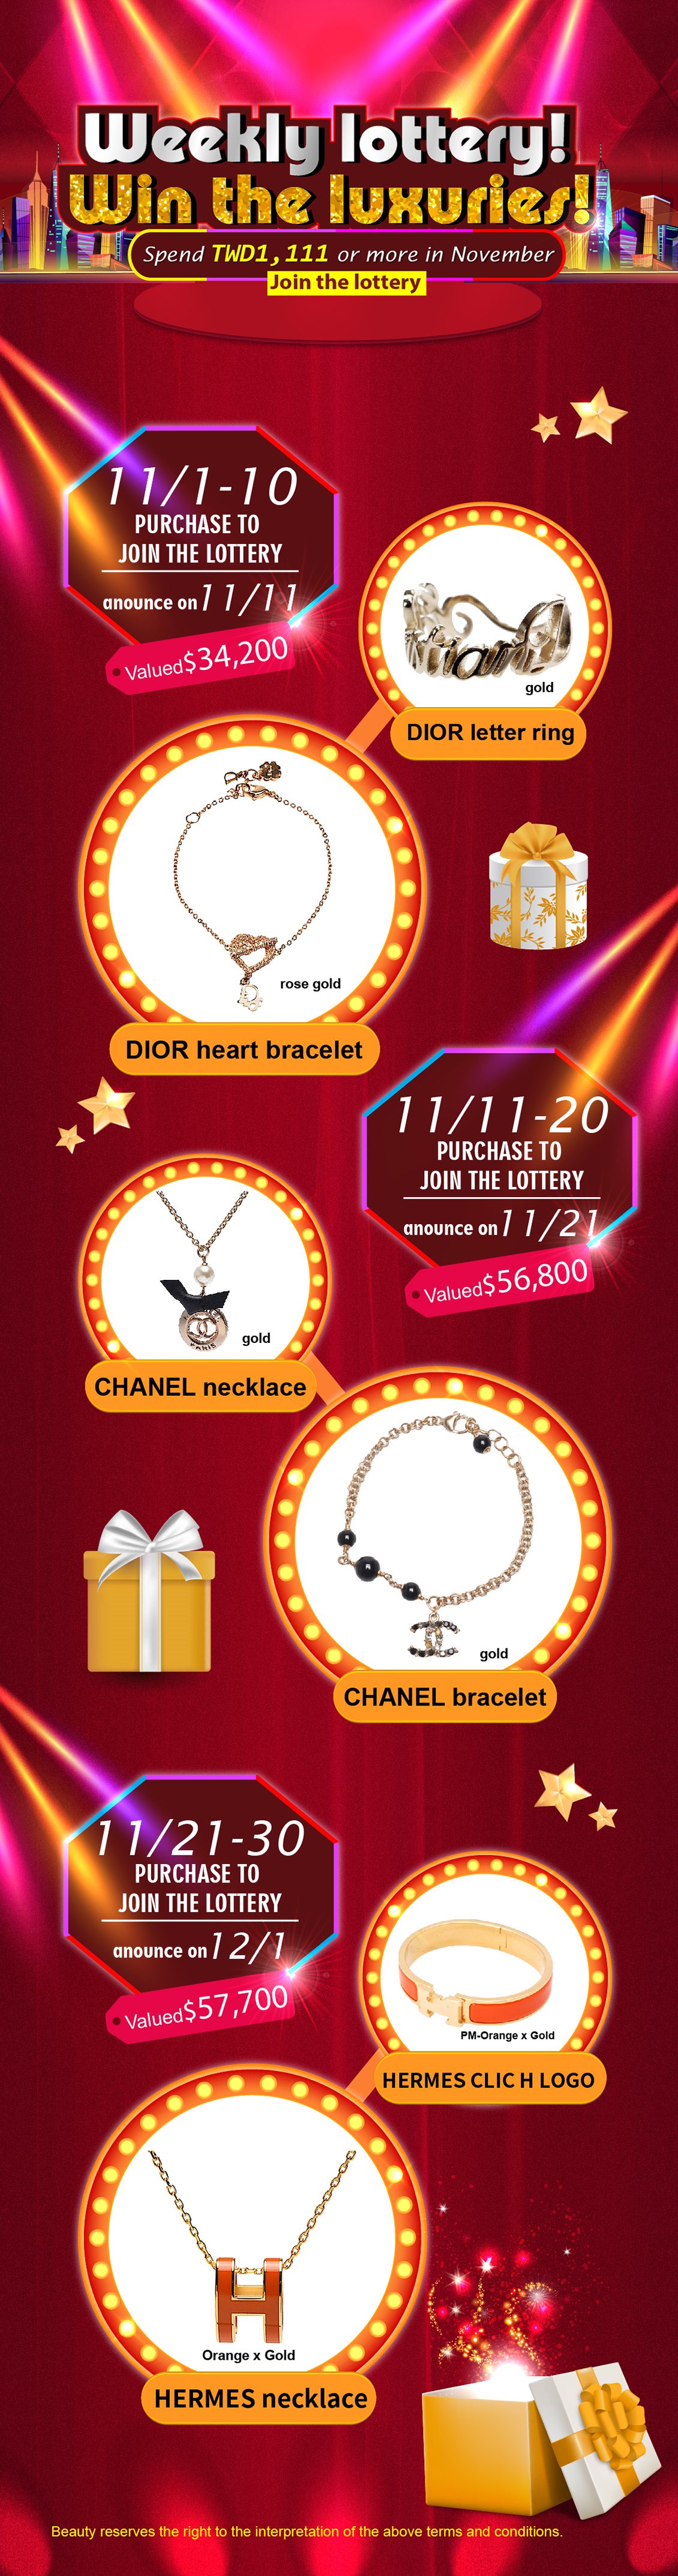 Weekly lottery! Win the luxuries!-edm-01.jpg